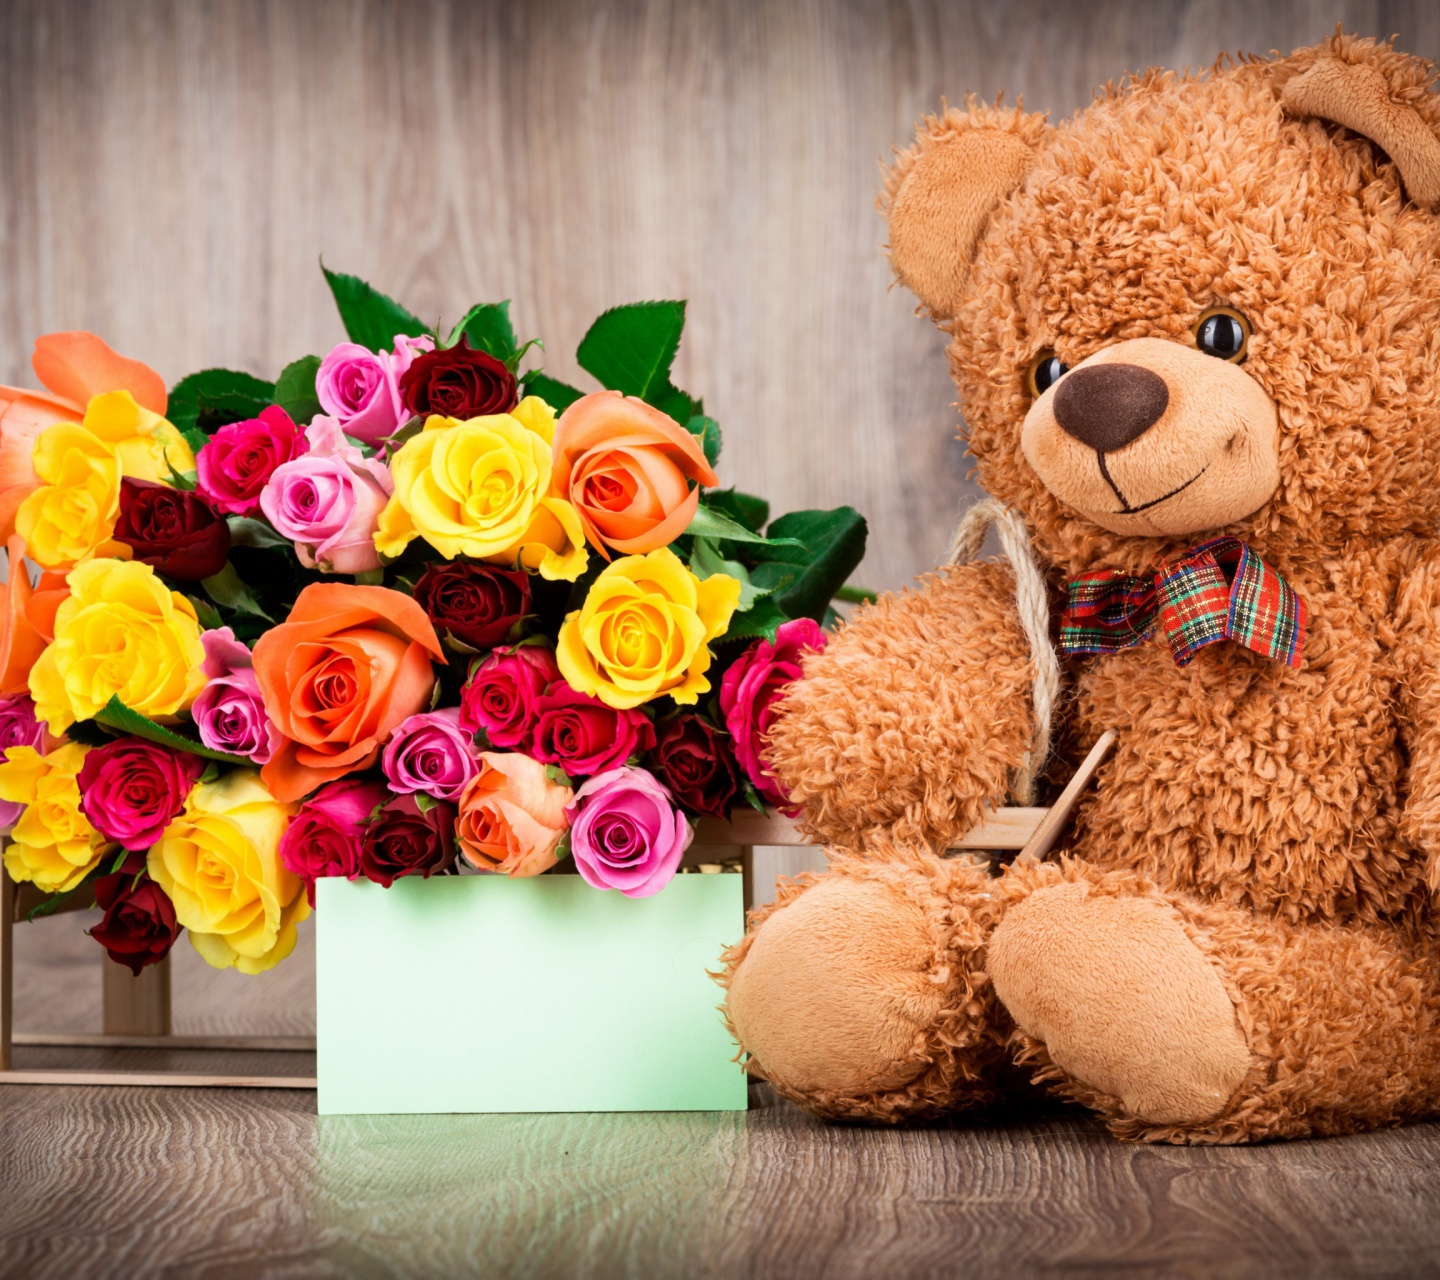 Valentines Day Teddy Bear with Gift screenshot #1 1440x1280